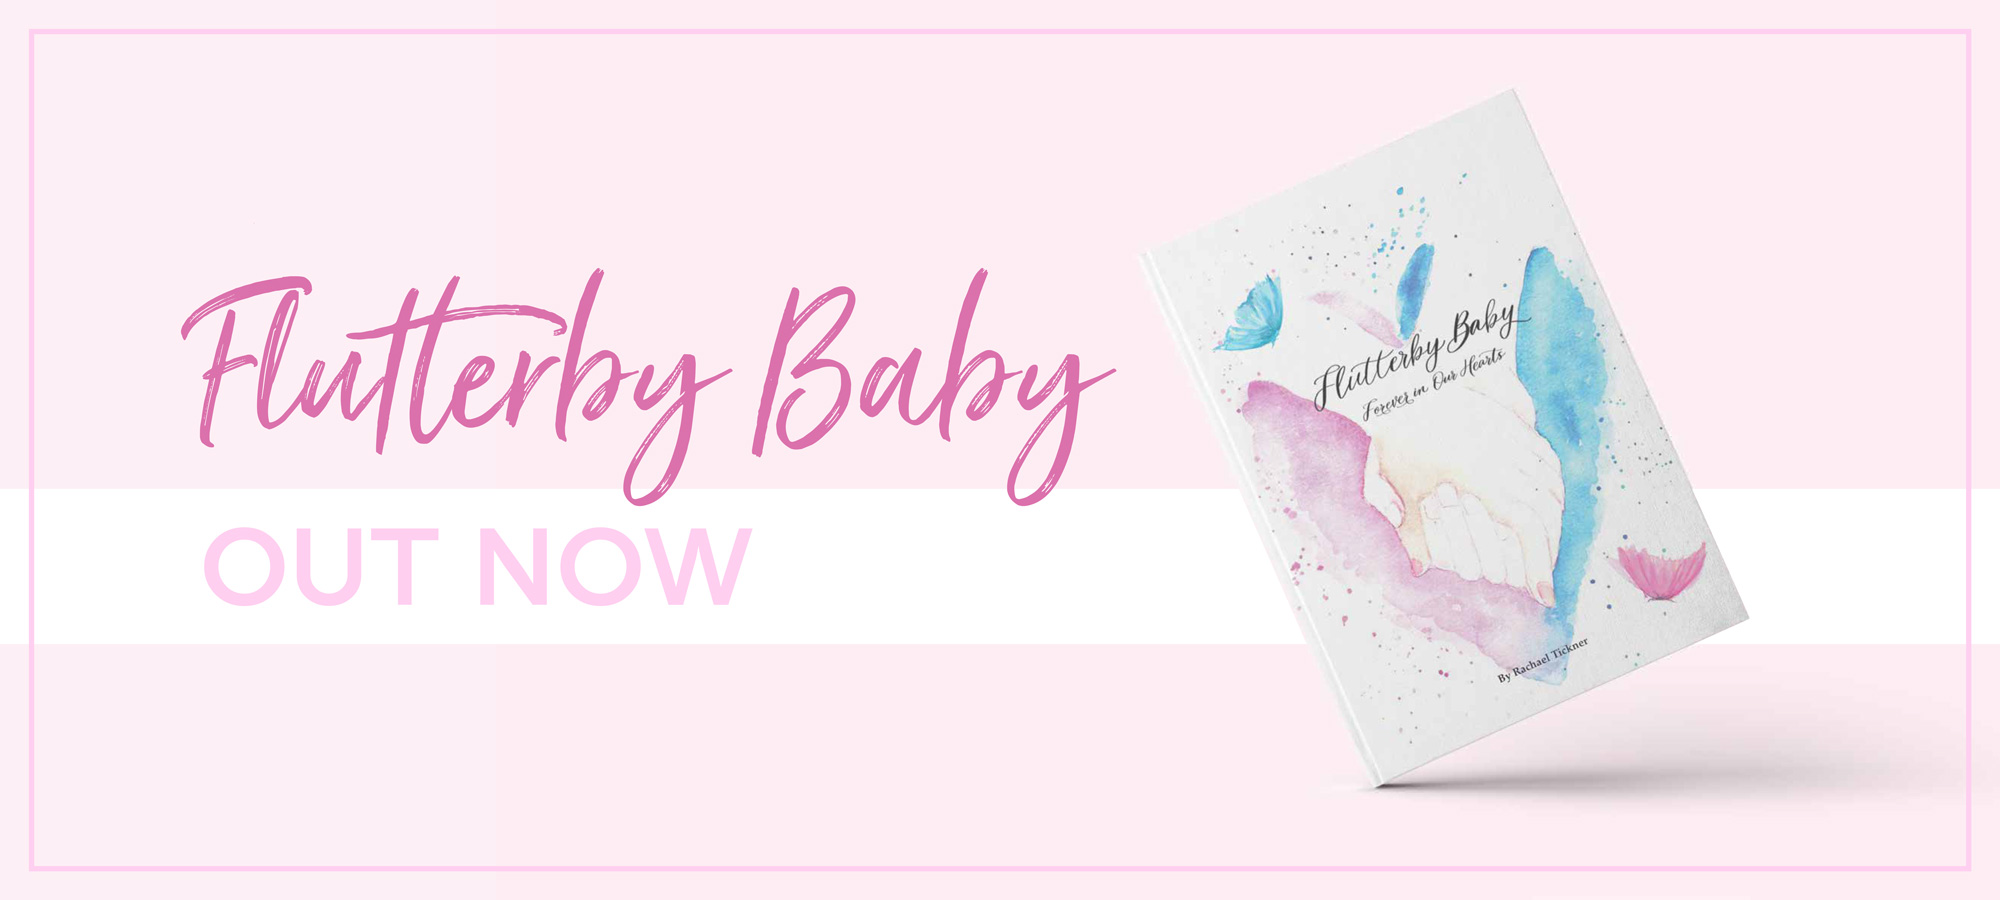 Flutterby Baby Book Out Now Banner